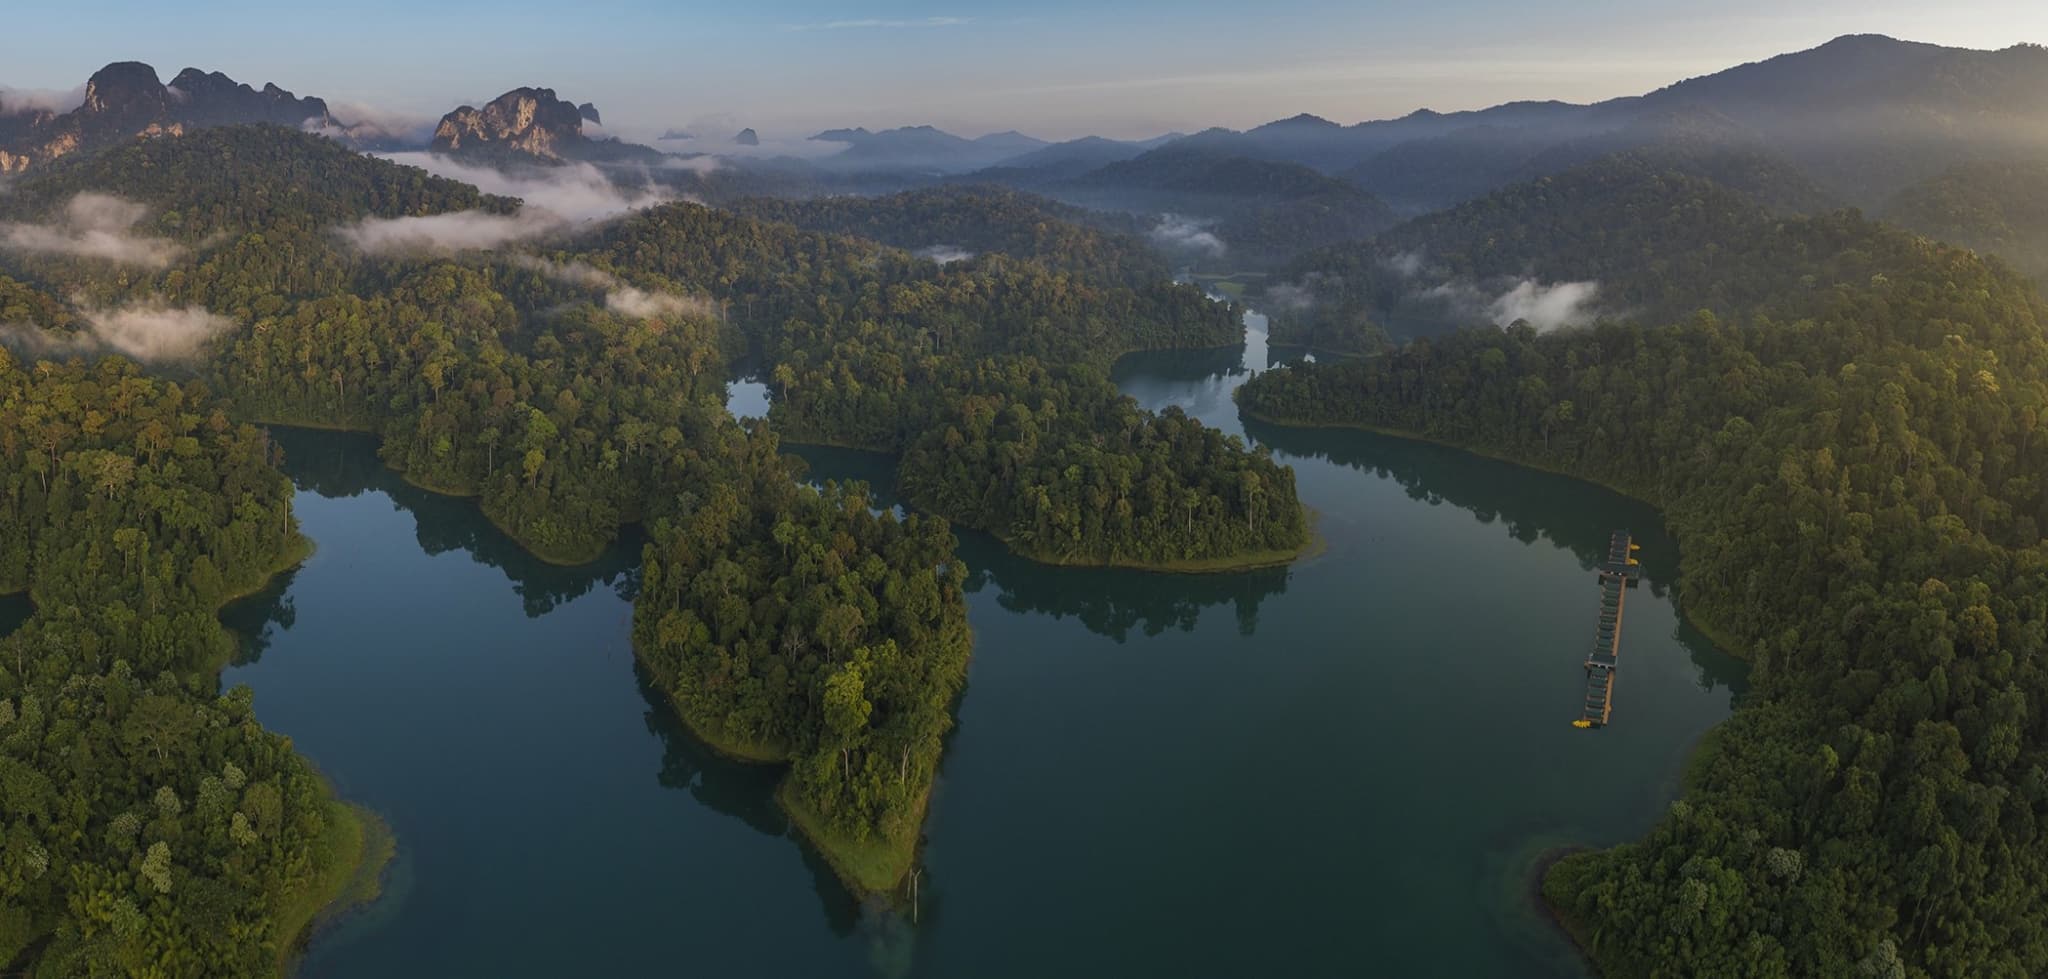 Sprawling rainforest in Khao Sok National Park, facts about Khao Sok size